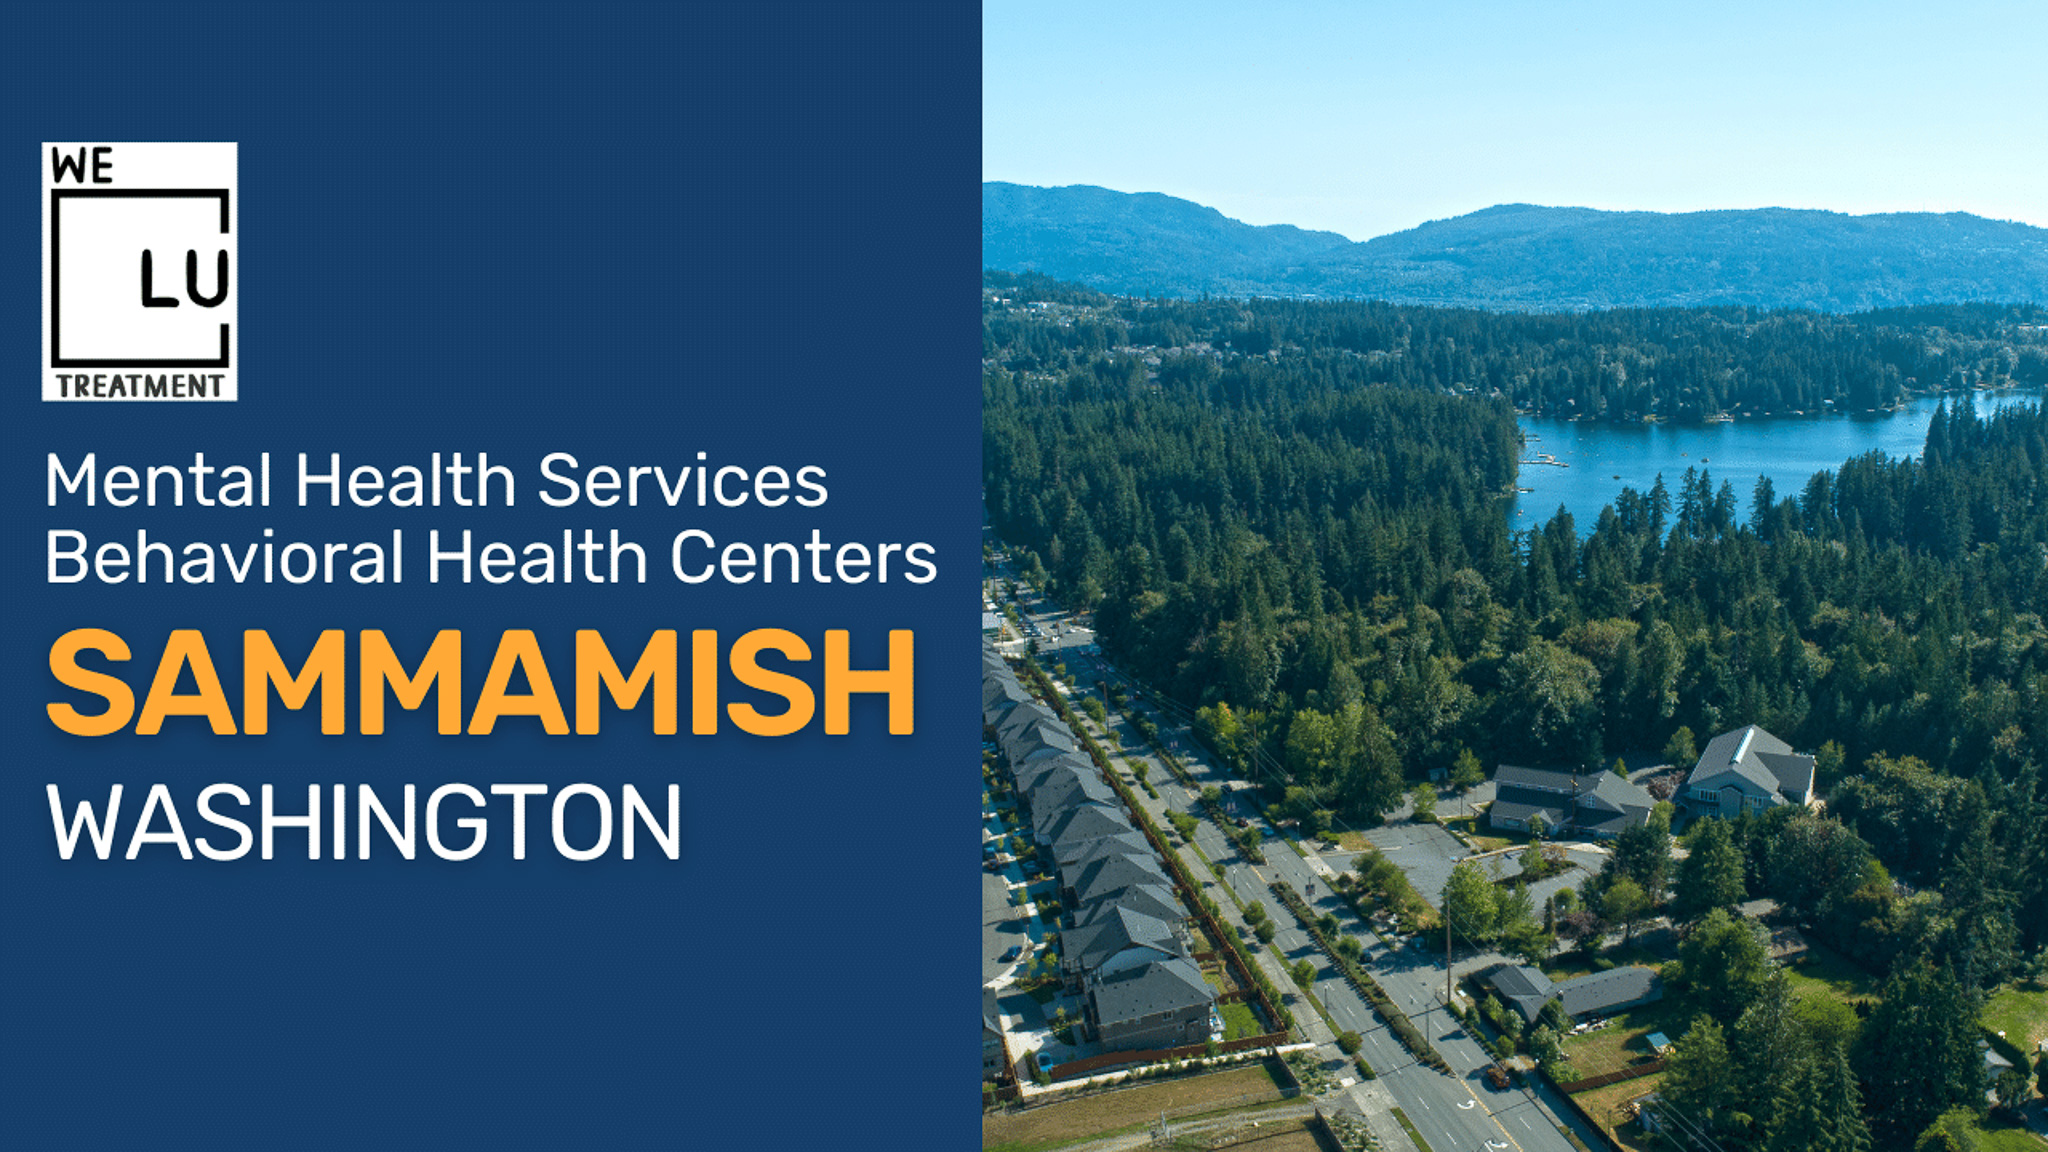 Sammamish WA We Level Up treatment center for drug and alcohol rehab detox and mental health services - Image 1